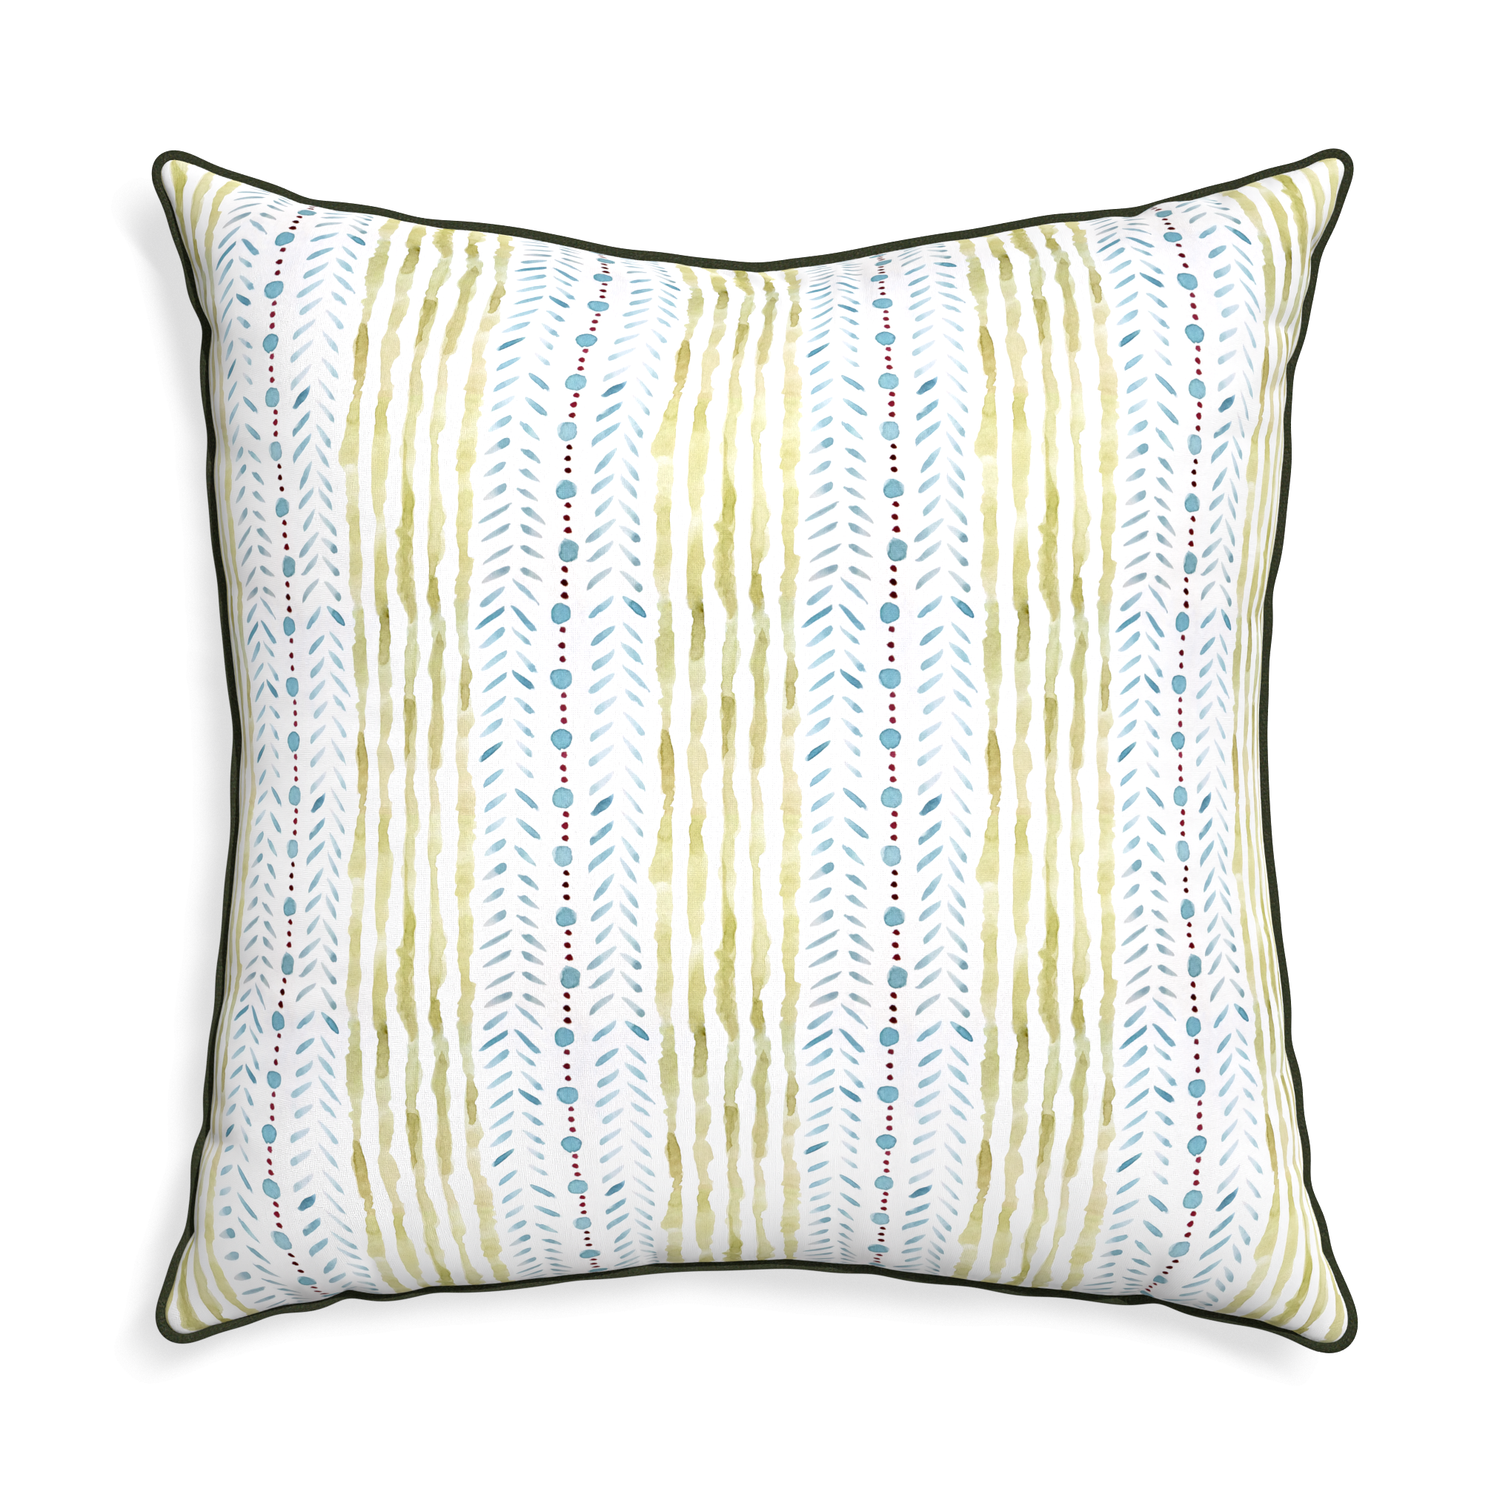 Euro-sham julia custom blue & green stripedpillow with f piping on white background